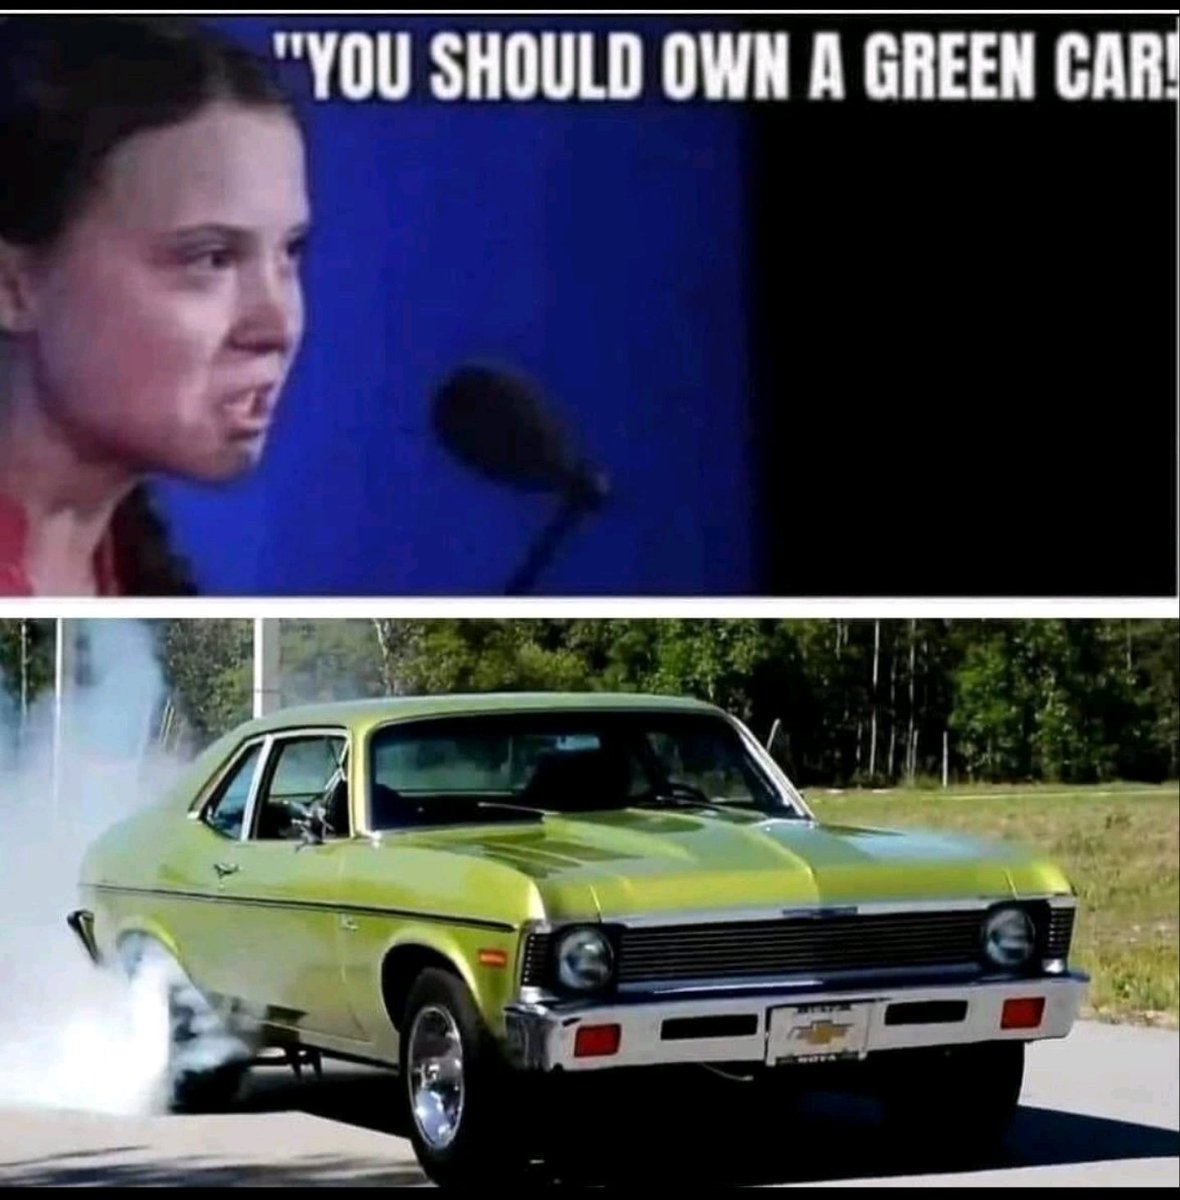 That's s a green car I'm ok with....